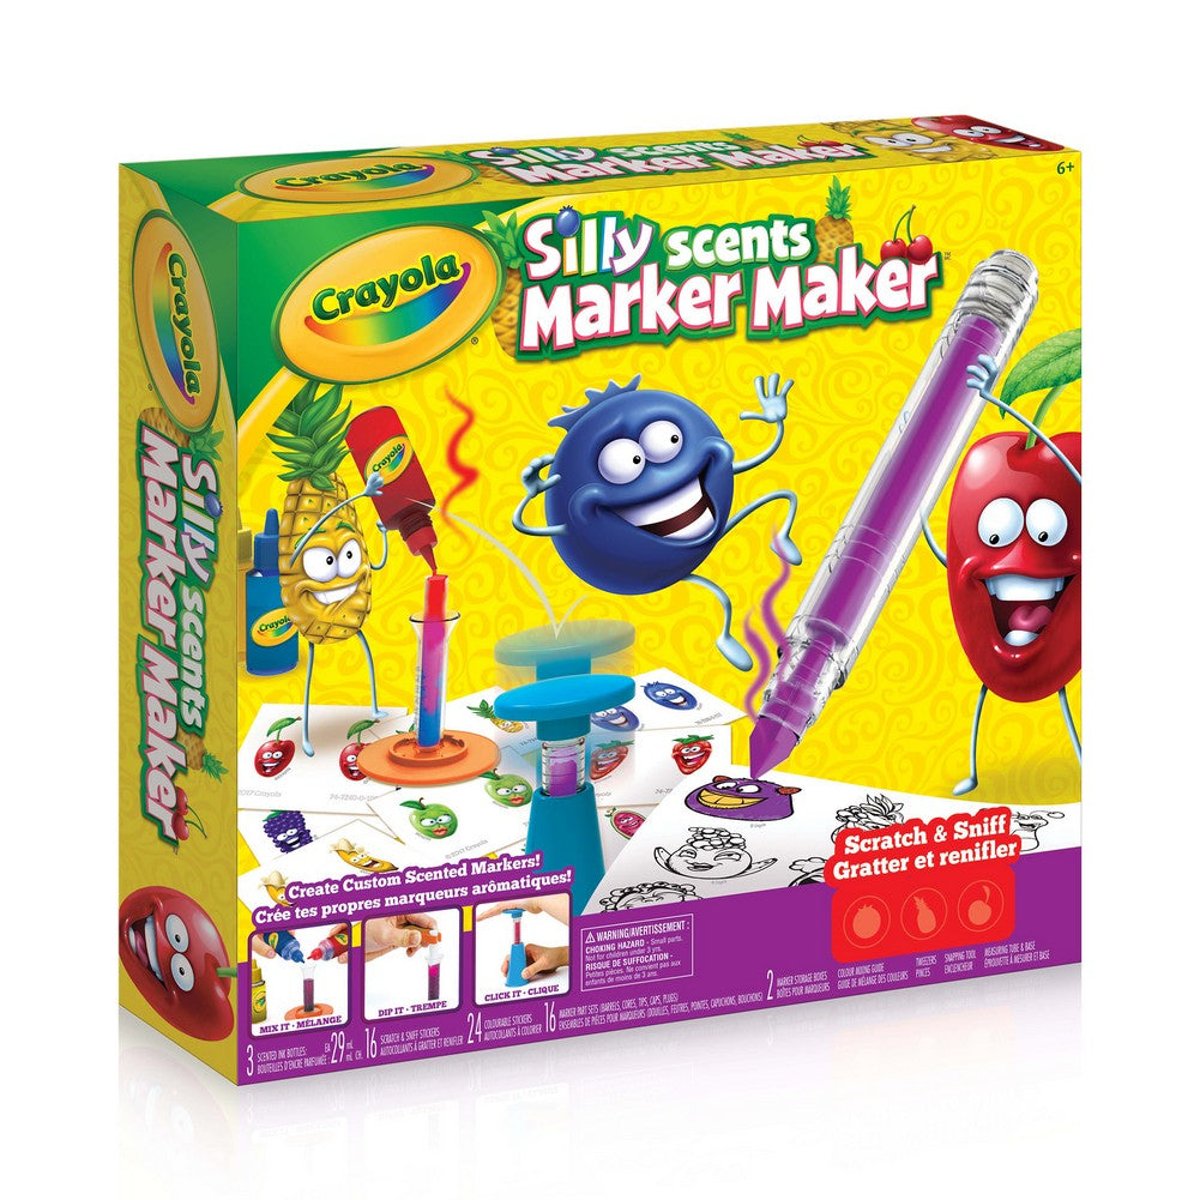 How to Make a Crayola Marker: Crayola Silly Scents Marker Maker Review